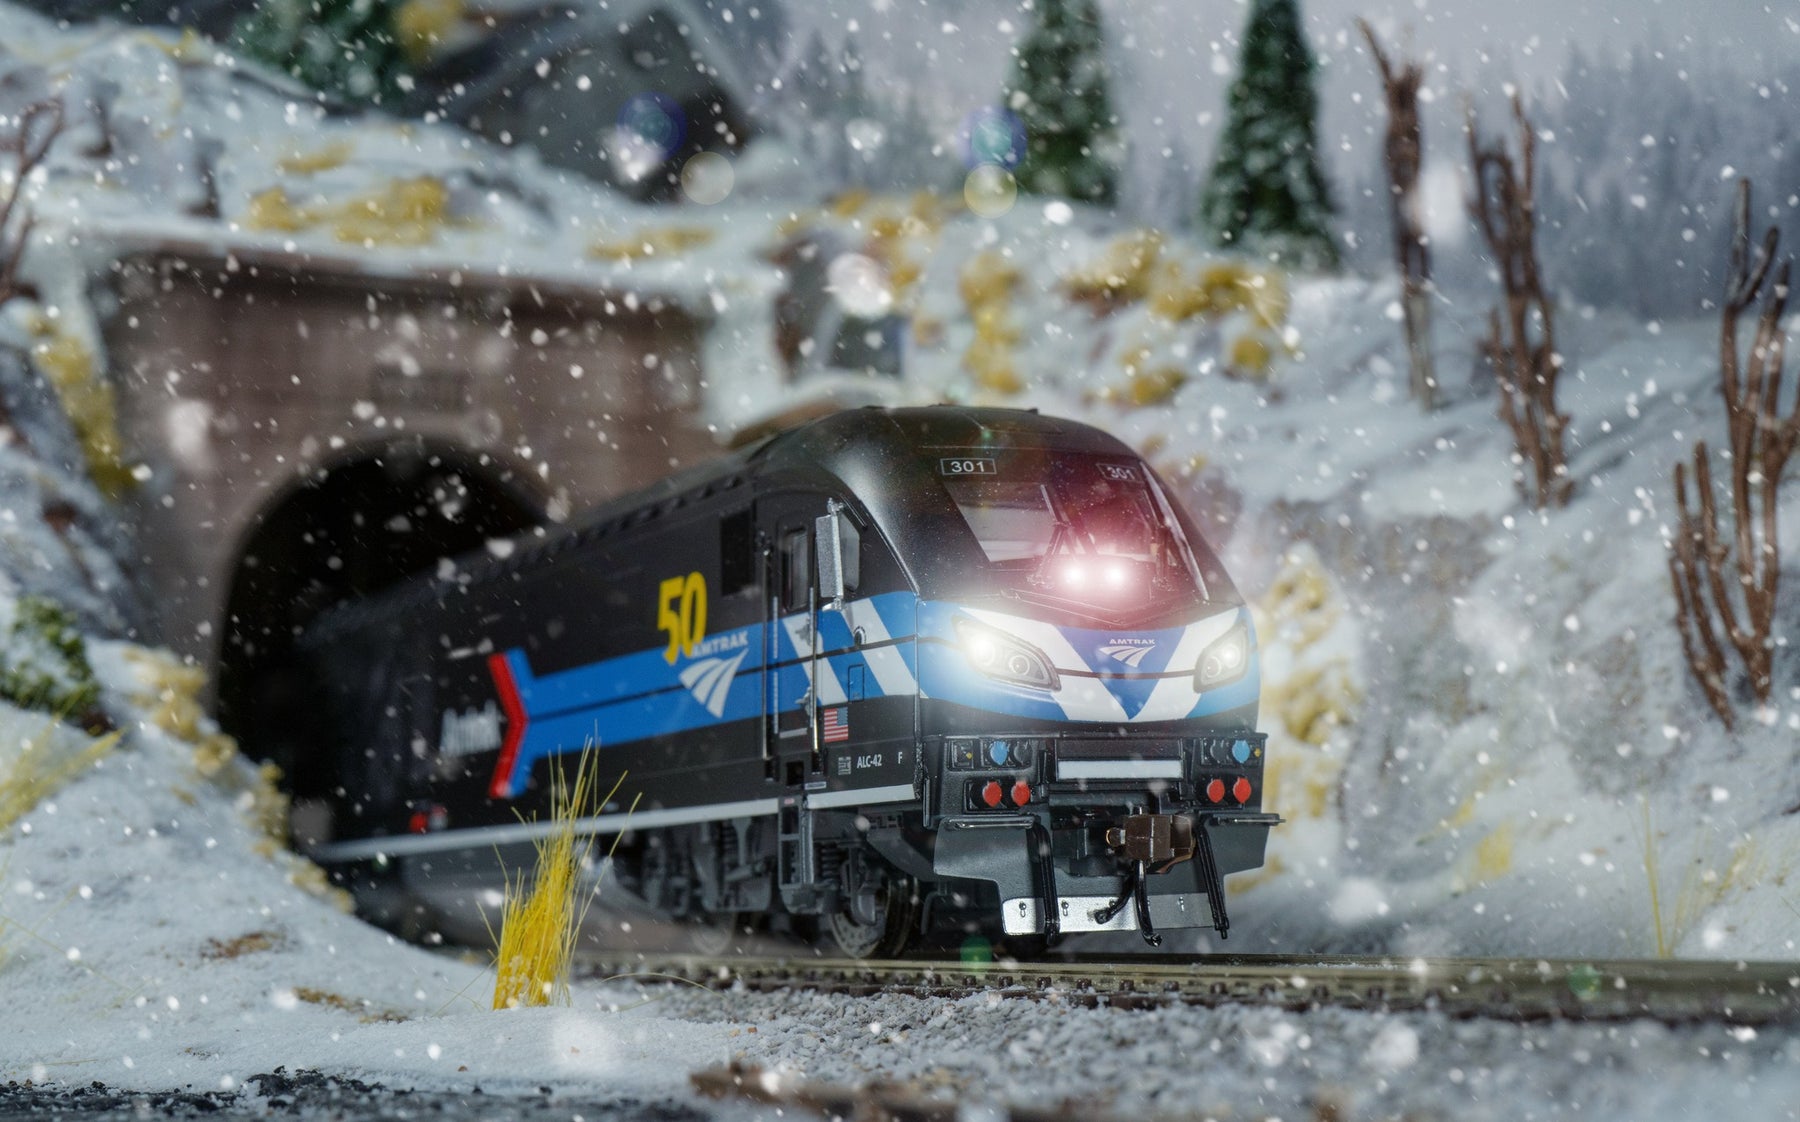 2022 the Year of Amtrak for Model Railroaders?